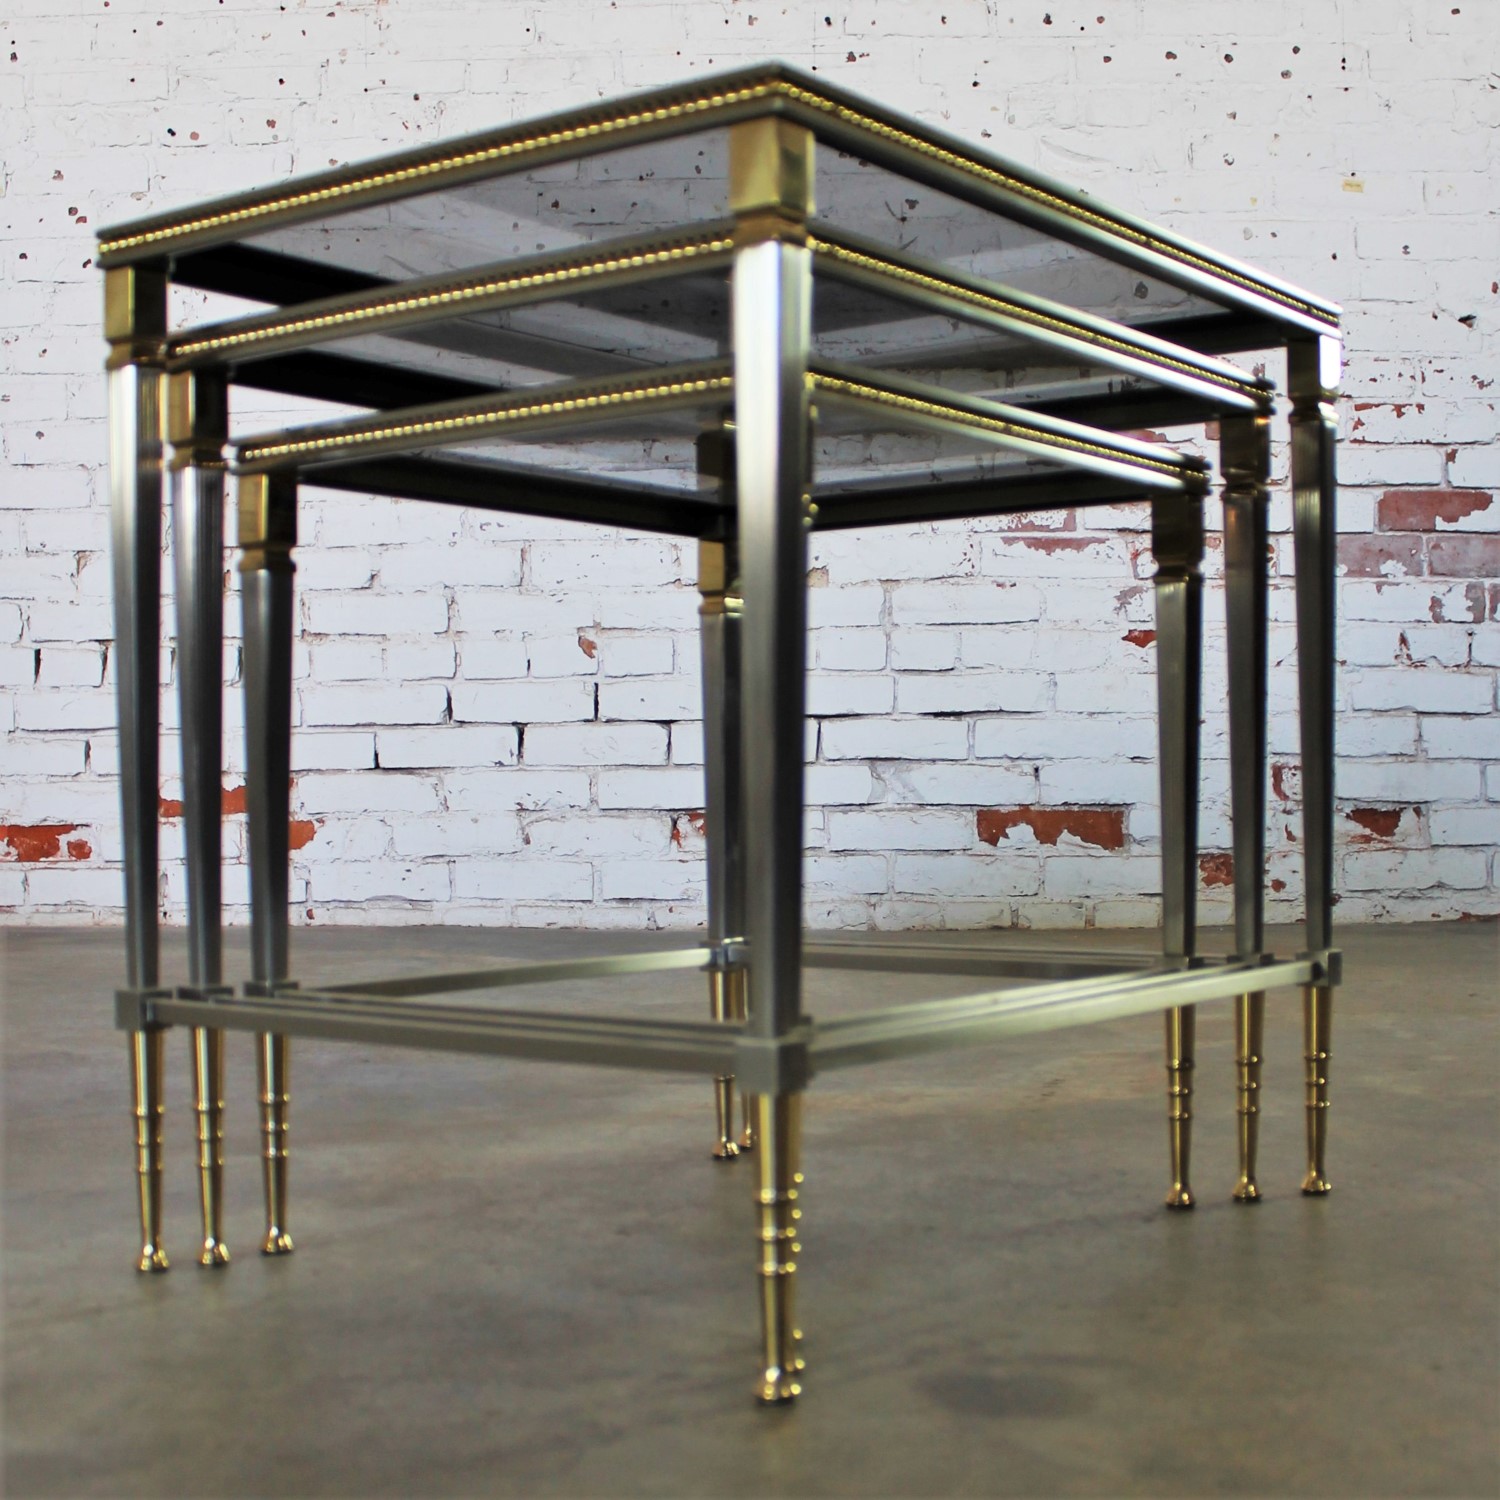 Brass & Stainless Nesting Tables w/Mirror Edged Glass Tops